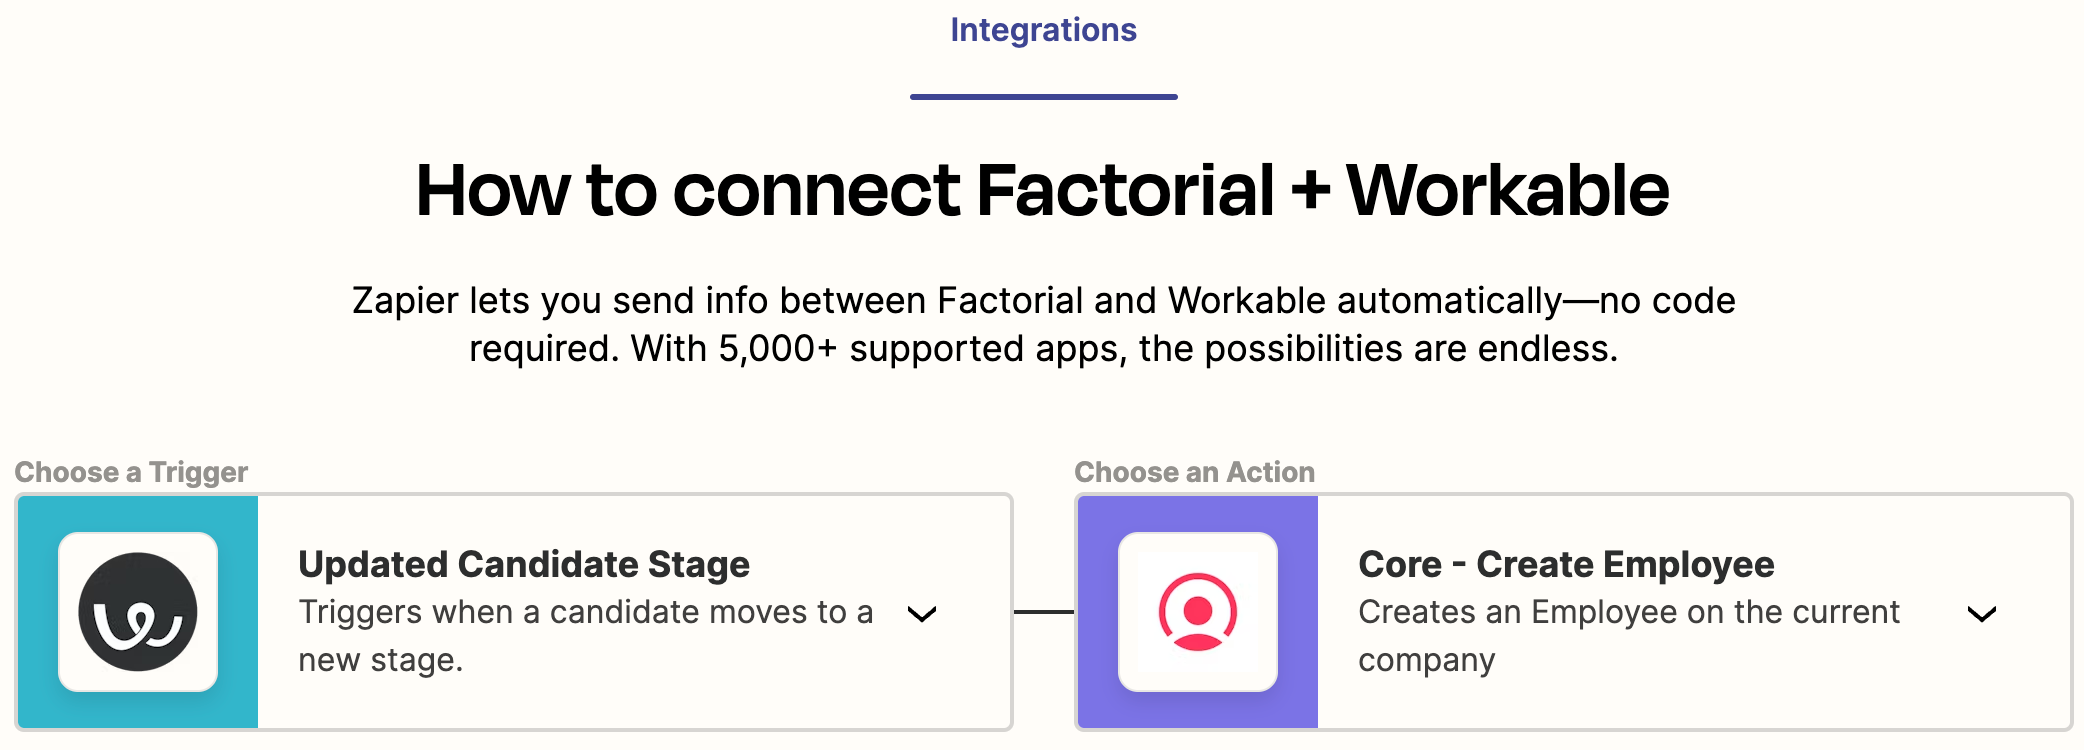 Connect_your_Factorial_to_Workable_integration_in_2_minutes___Zapier.png